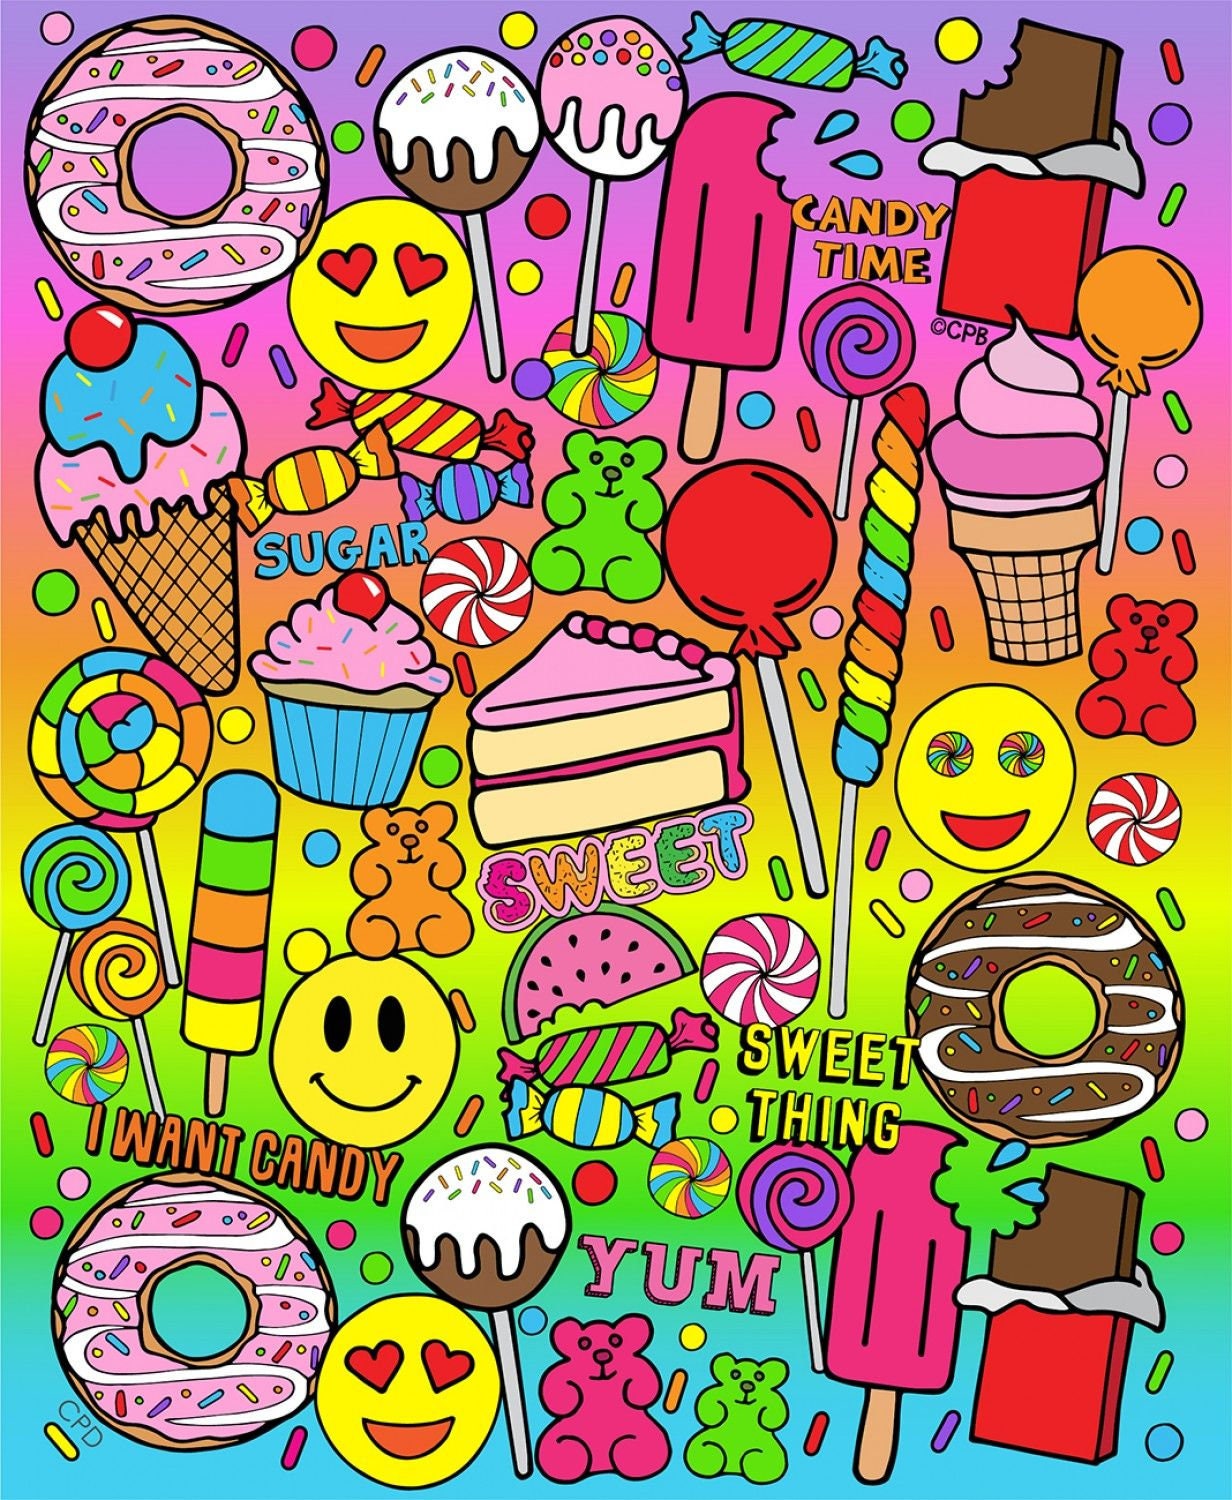 Design by Corey Paige I Want Candy Rainbow 10406-RAINBOW Cotton Woven Fabric